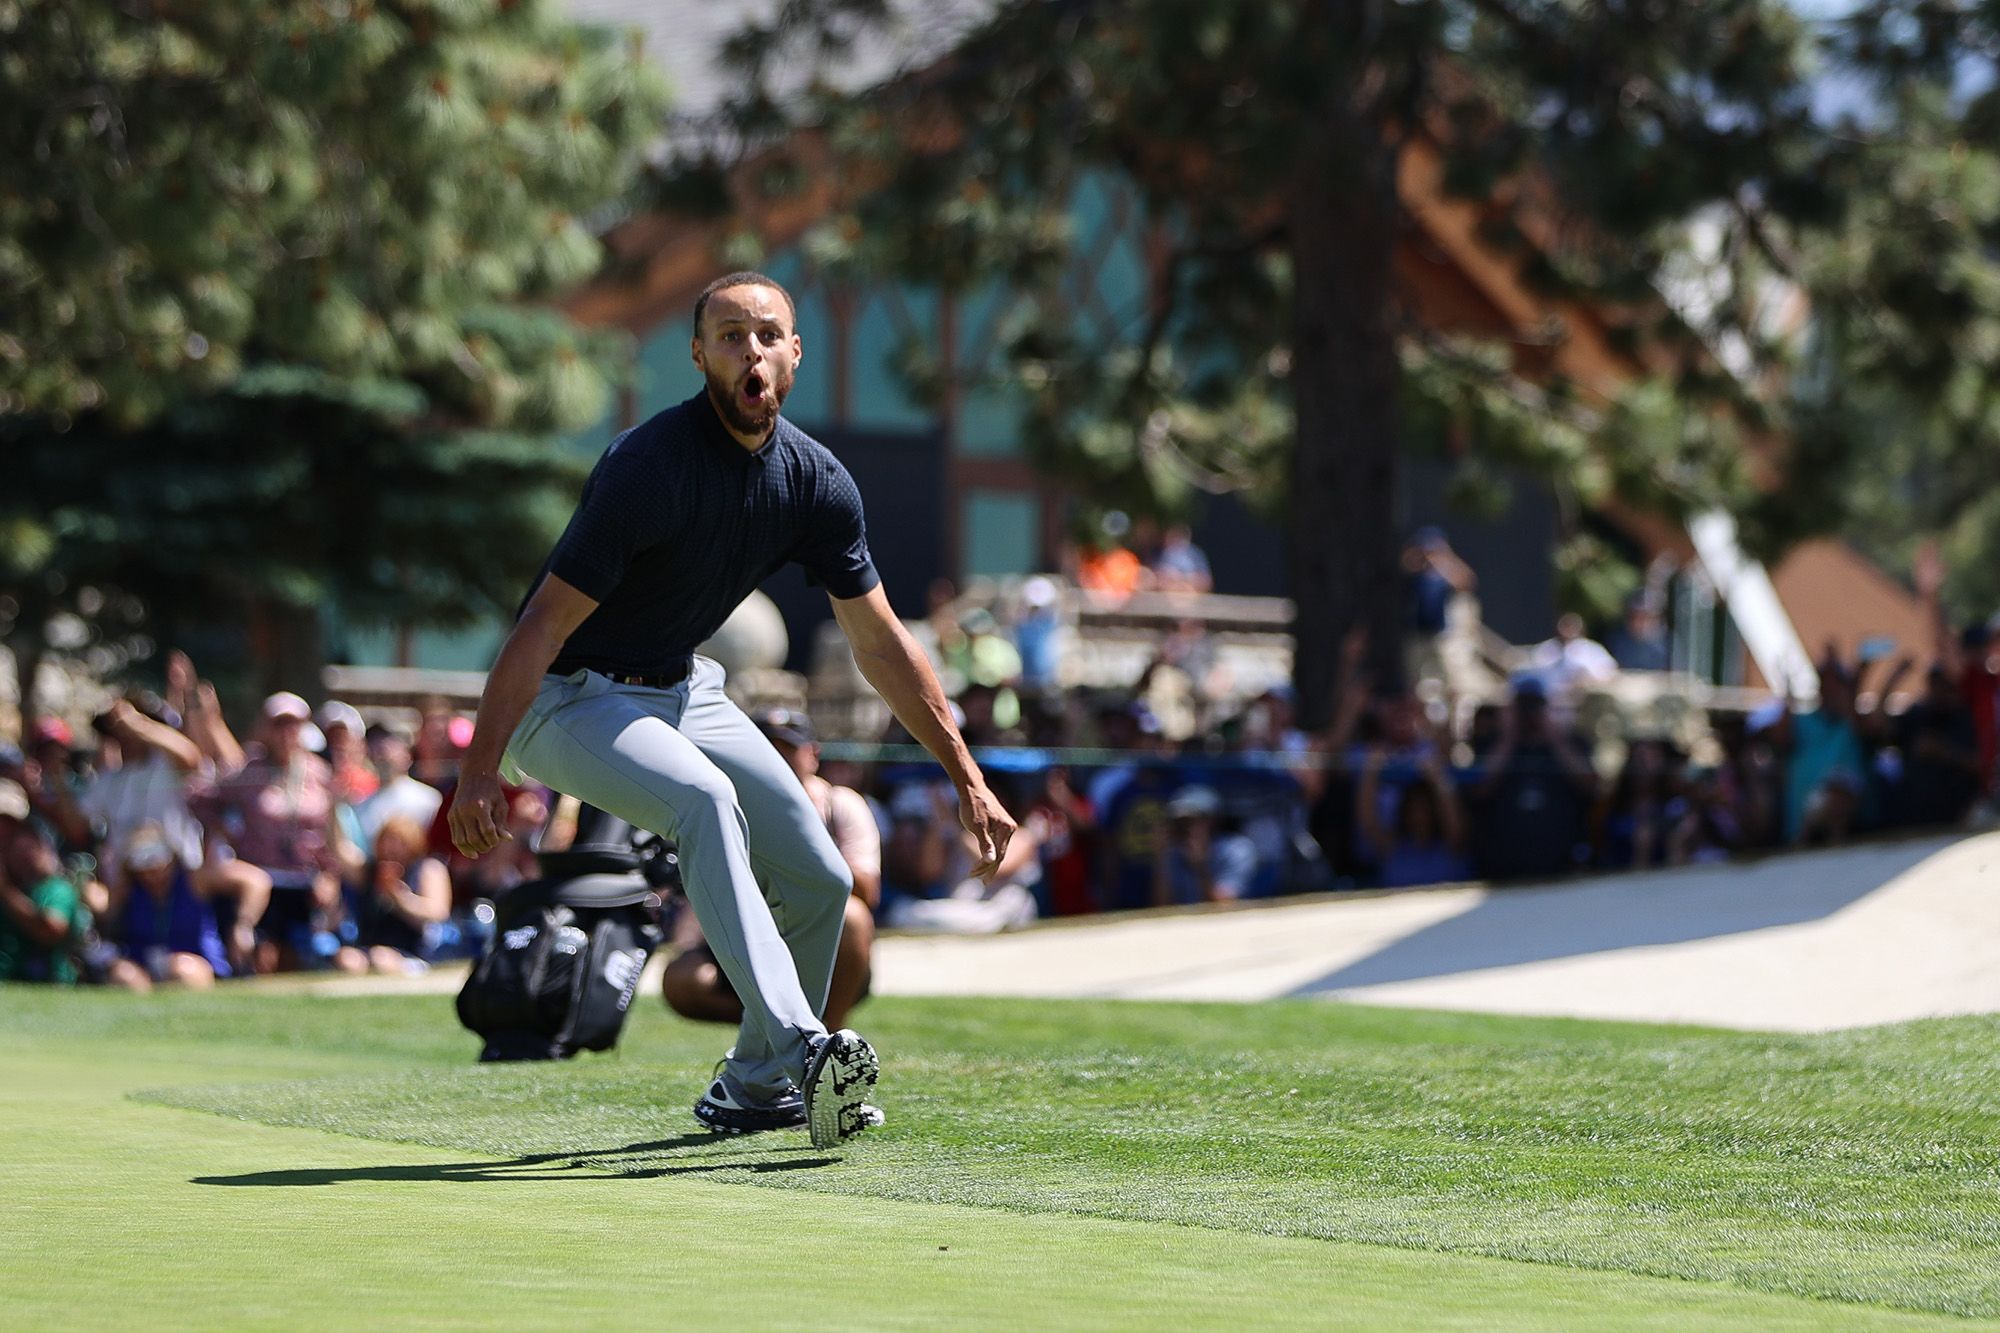 Ecstatic Steph Curry sinks walk-off eagle to win celebrity golf tournament